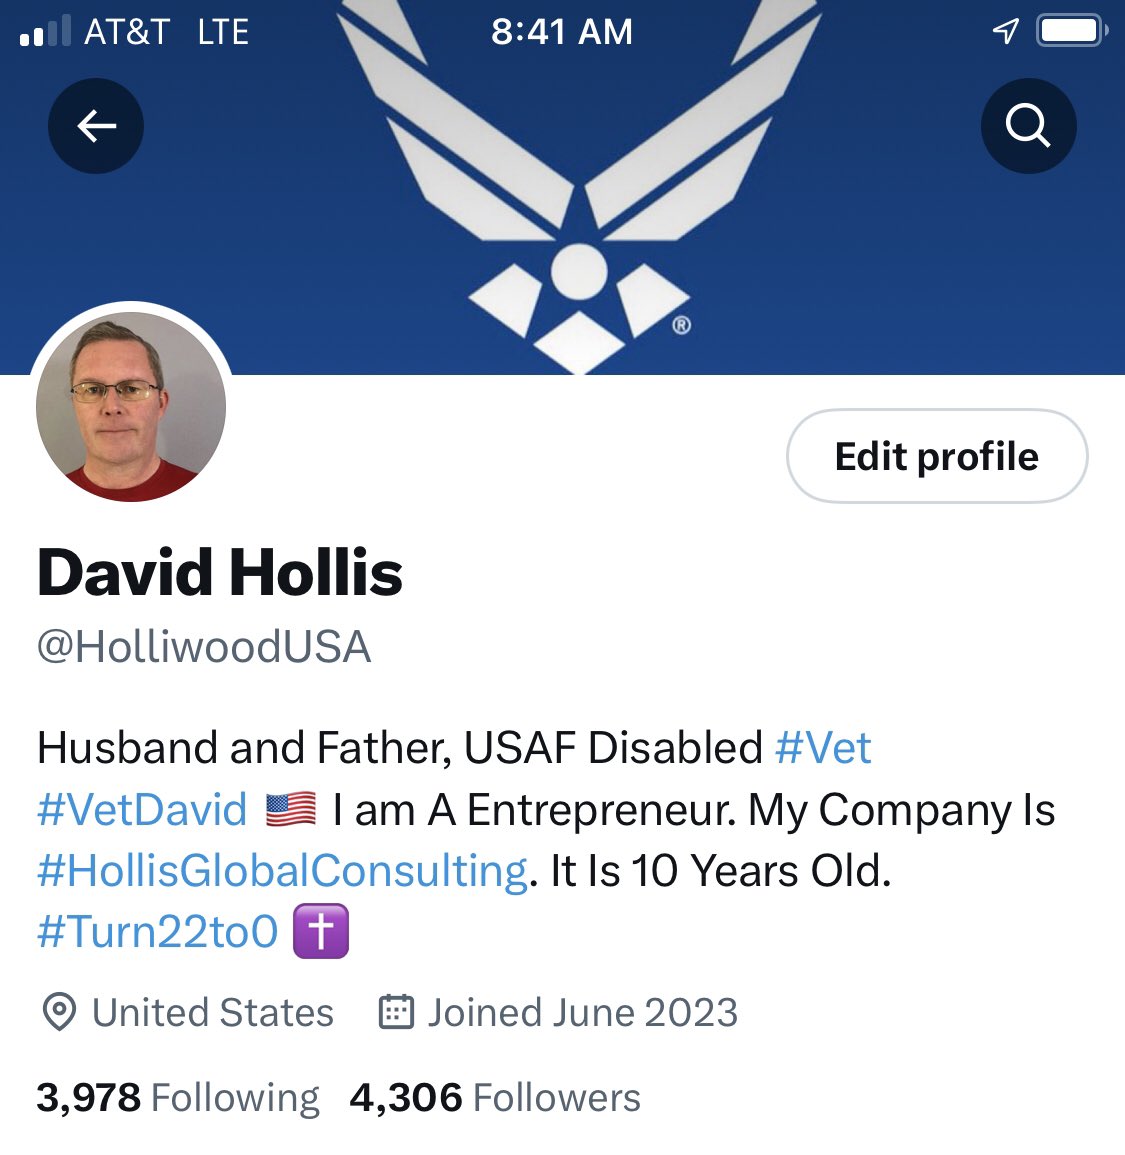 #WednesdayVibes🤔😊

#bbrightvc 
#MINGYUxDiorAW24 
#ParisFashionWeek 

Good Morning #Patriots👍🇺🇸

#PatriotsUnite👍🇺🇸

I Have 4,306 #Followers. TY For All Who Are Following Me.

I Would Really Like To Get To 5K

Please Share This #XPost Patriots

#VetDavid
@HolliwoodUSA